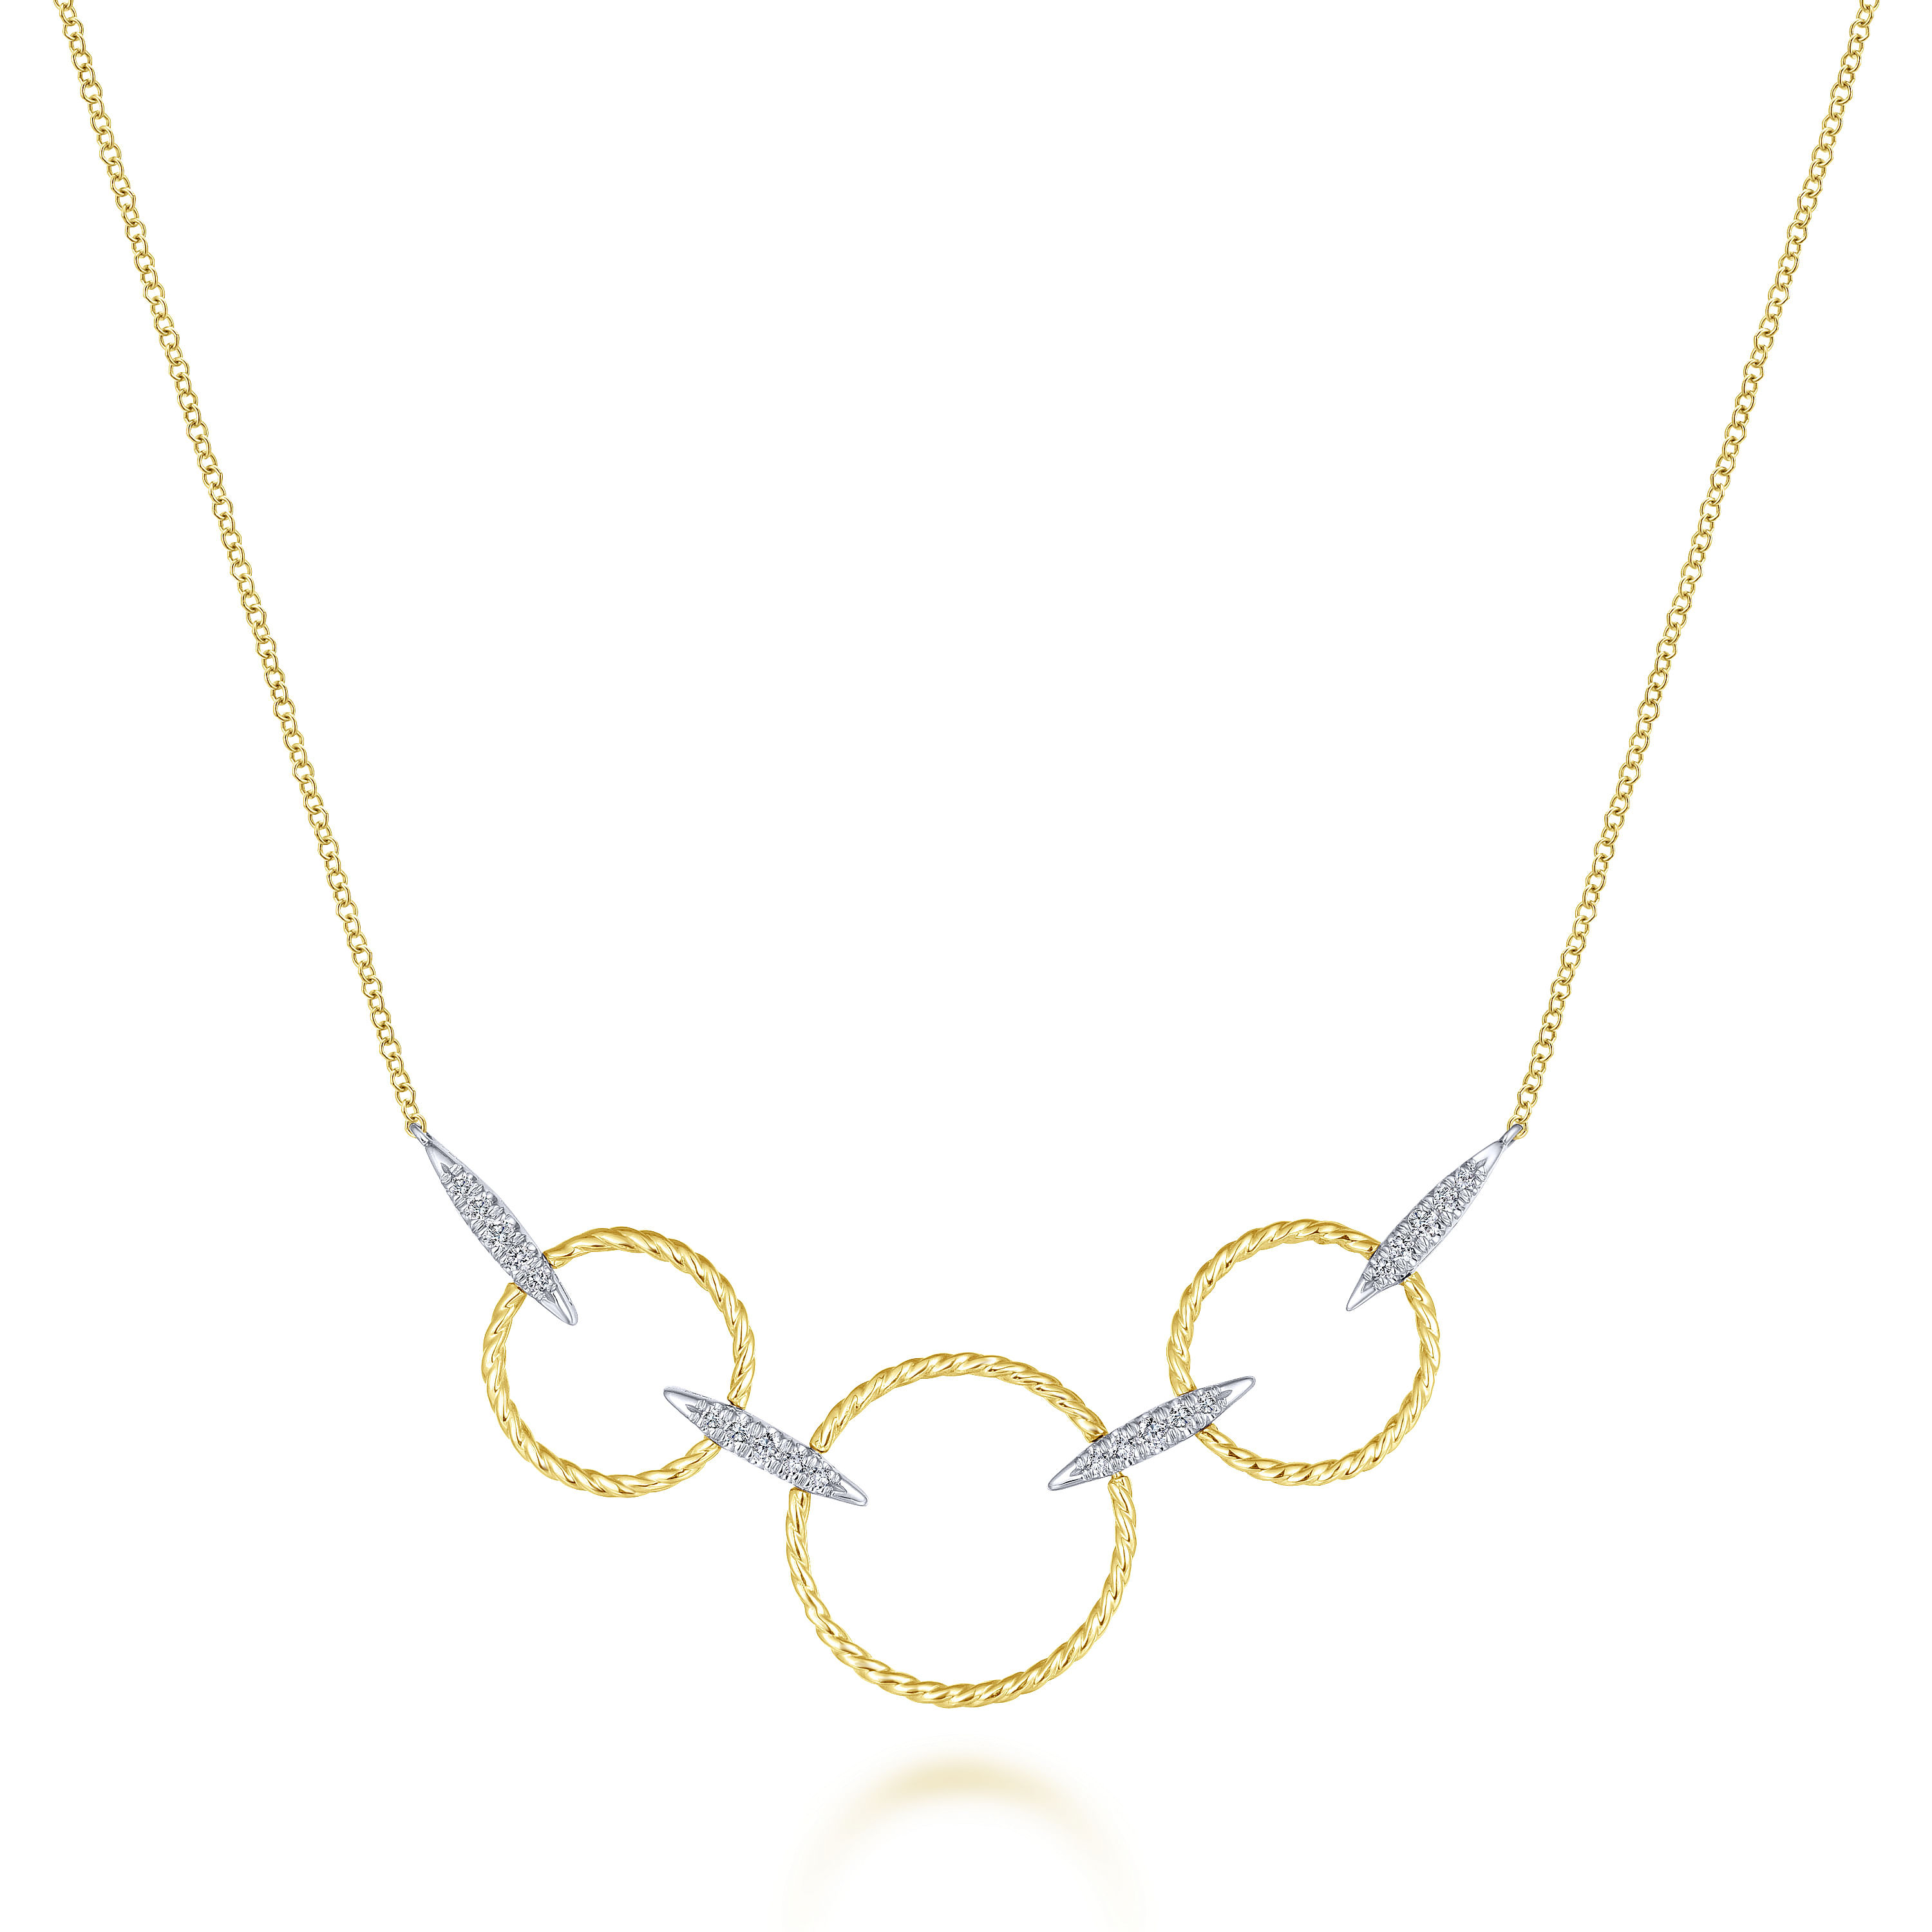 Gabriel - 14K Yellow-White Gold Triple Loop Necklace with Diamond Connectors